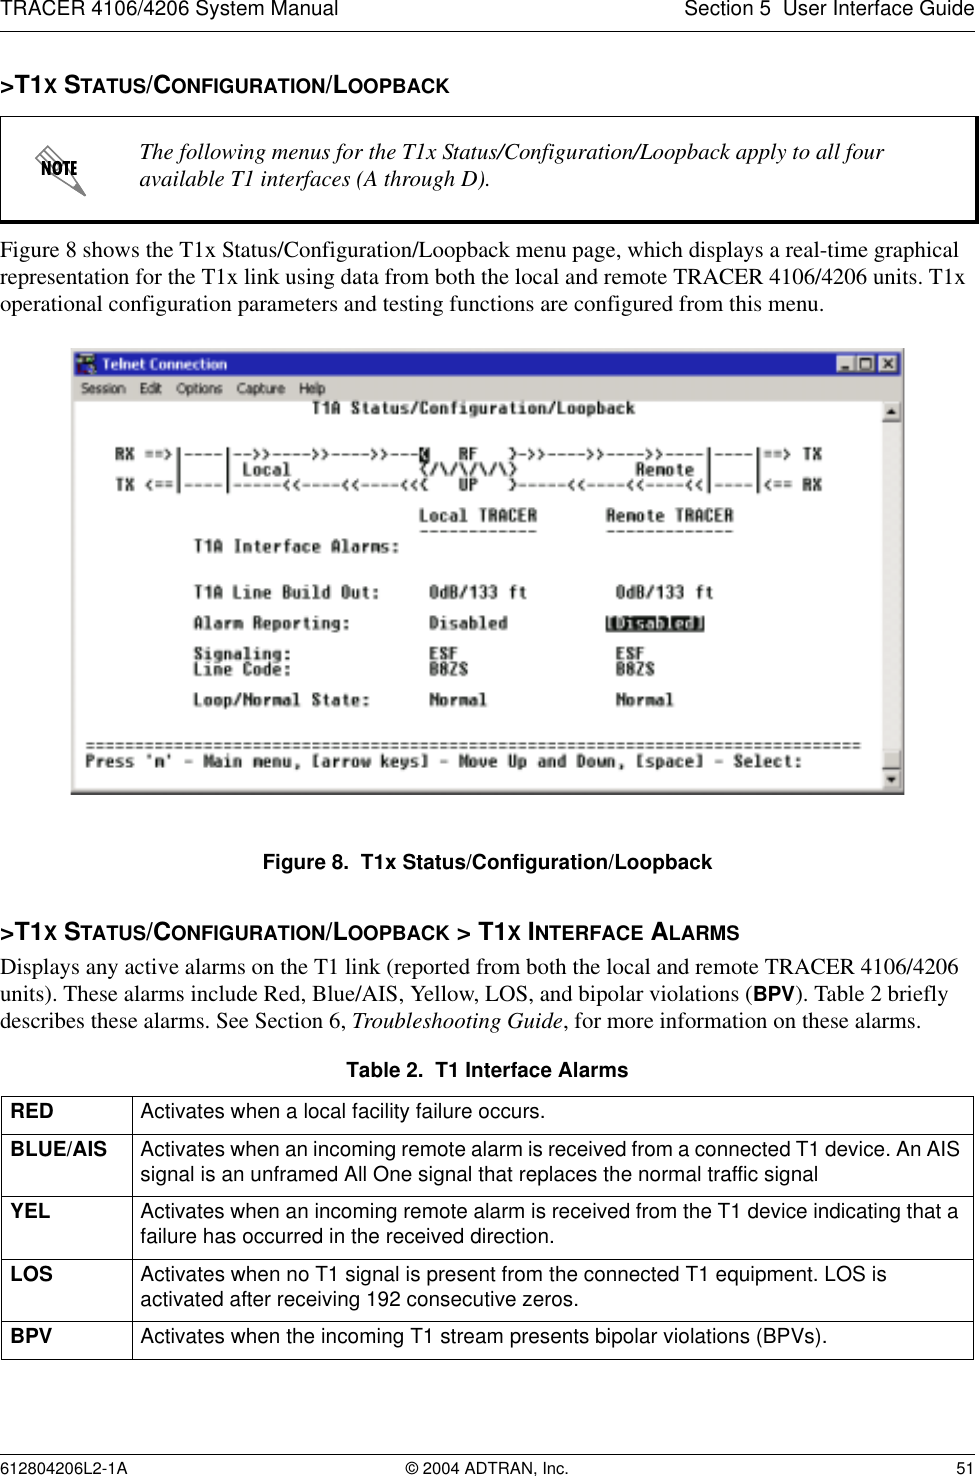 TRACER 4106/4206 System Manual Section 5  User Interface Guide612804206L2-1A © 2004 ADTRAN, Inc. 51&gt;T1X STATUS/CONFIGURATION/LOOPBACKFigure 8 shows the T1x Status/Configuration/Loopback menu page, which displays a real-time graphical representation for the T1x link using data from both the local and remote TRACER 4106/4206 units. T1x operational configuration parameters and testing functions are configured from this menu.Figure 8.  T1x Status/Configuration/Loopback&gt;T1X STATUS/CONFIGURATION/LOOPBACK &gt; T1X INTERFACE ALARMSDisplays any active alarms on the T1 link (reported from both the local and remote TRACER 4106/4206 units). These alarms include Red, Blue/AIS, Yellow, LOS, and bipolar violations (BPV). Table 2 briefly describes these alarms. See Section 6, Troubleshooting Guide, for more information on these alarms.The following menus for the T1x Status/Configuration/Loopback apply to all four available T1 interfaces (A through D).Table 2.  T1 Interface AlarmsRED Activates when a local facility failure occurs.BLUE/AIS Activates when an incoming remote alarm is received from a connected T1 device. An AIS signal is an unframed All One signal that replaces the normal traffic signalYEL Activates when an incoming remote alarm is received from the T1 device indicating that a failure has occurred in the received direction.LOS Activates when no T1 signal is present from the connected T1 equipment. LOS is activated after receiving 192 consecutive zeros.BPV Activates when the incoming T1 stream presents bipolar violations (BPVs).